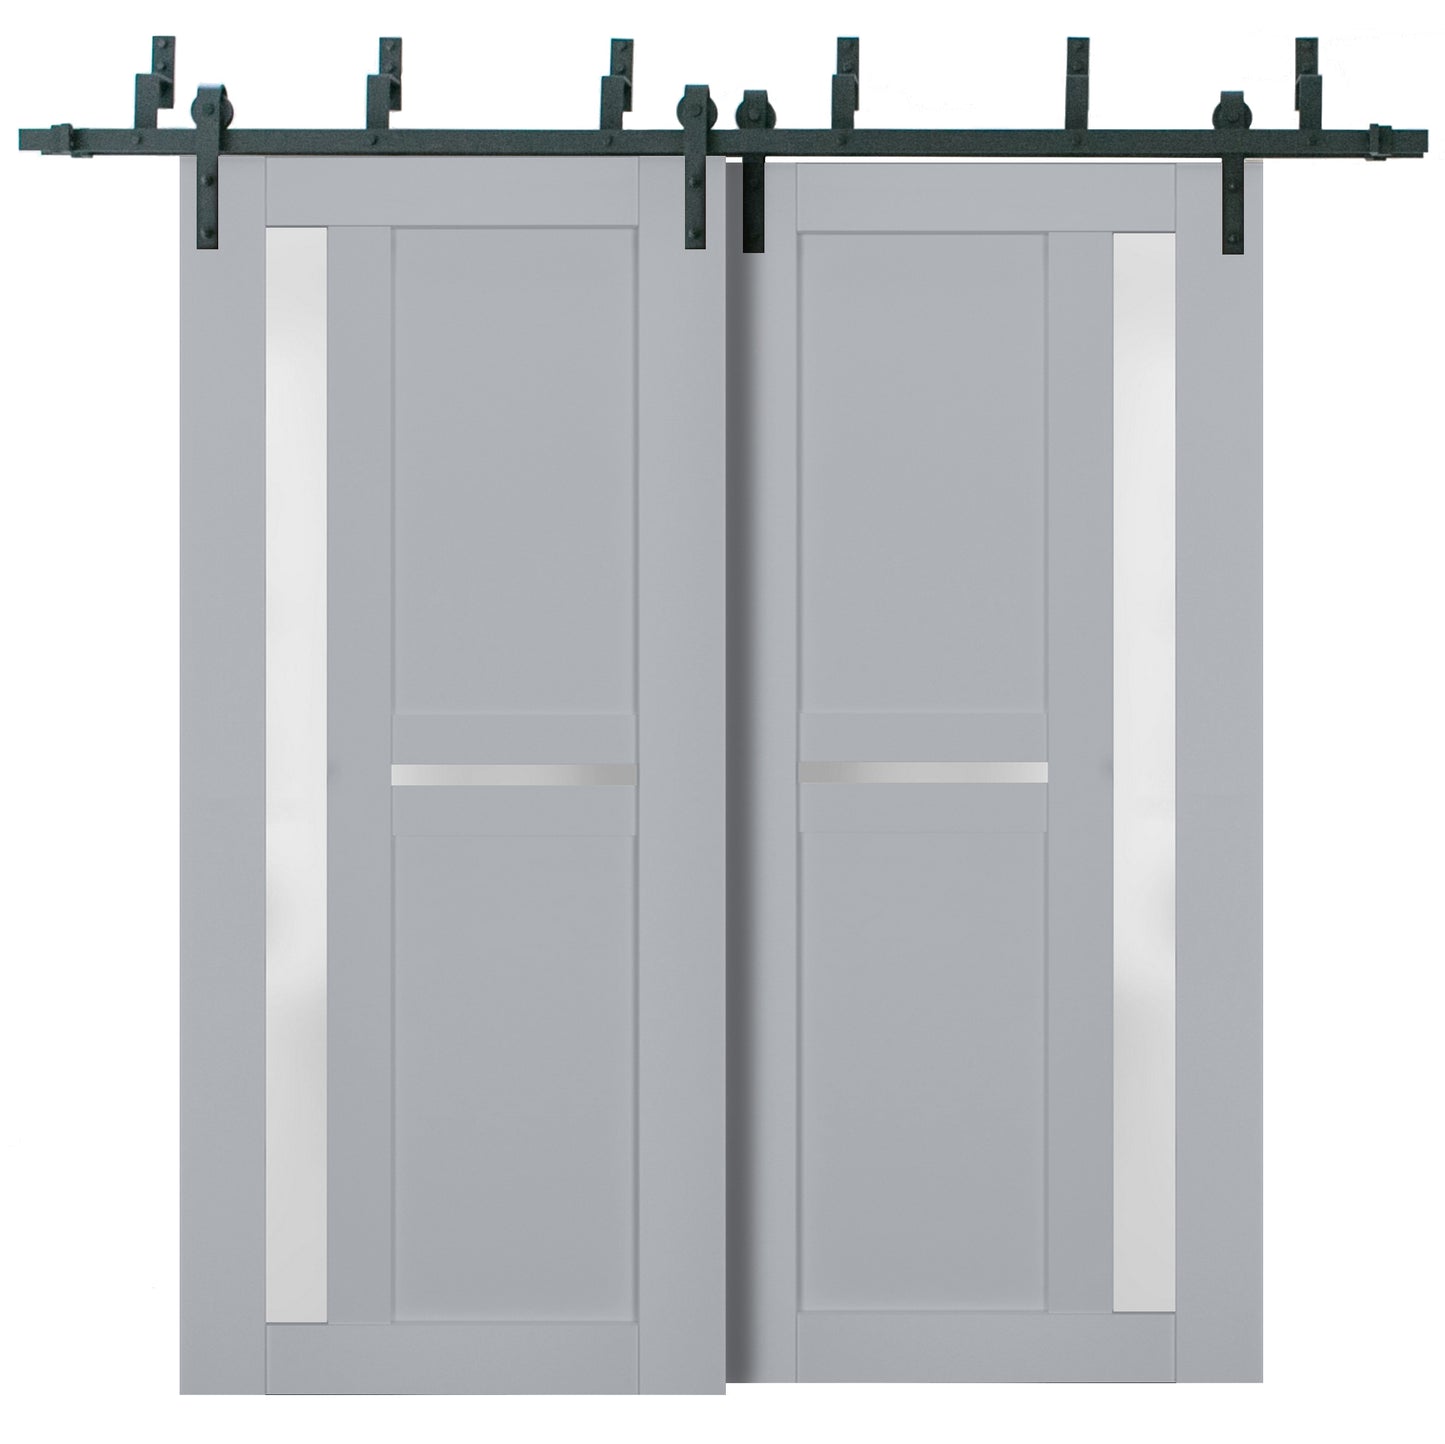 Veregio 7288 Matte Grey Double Barn Door with Frosted Glass and Black Bypass Rail